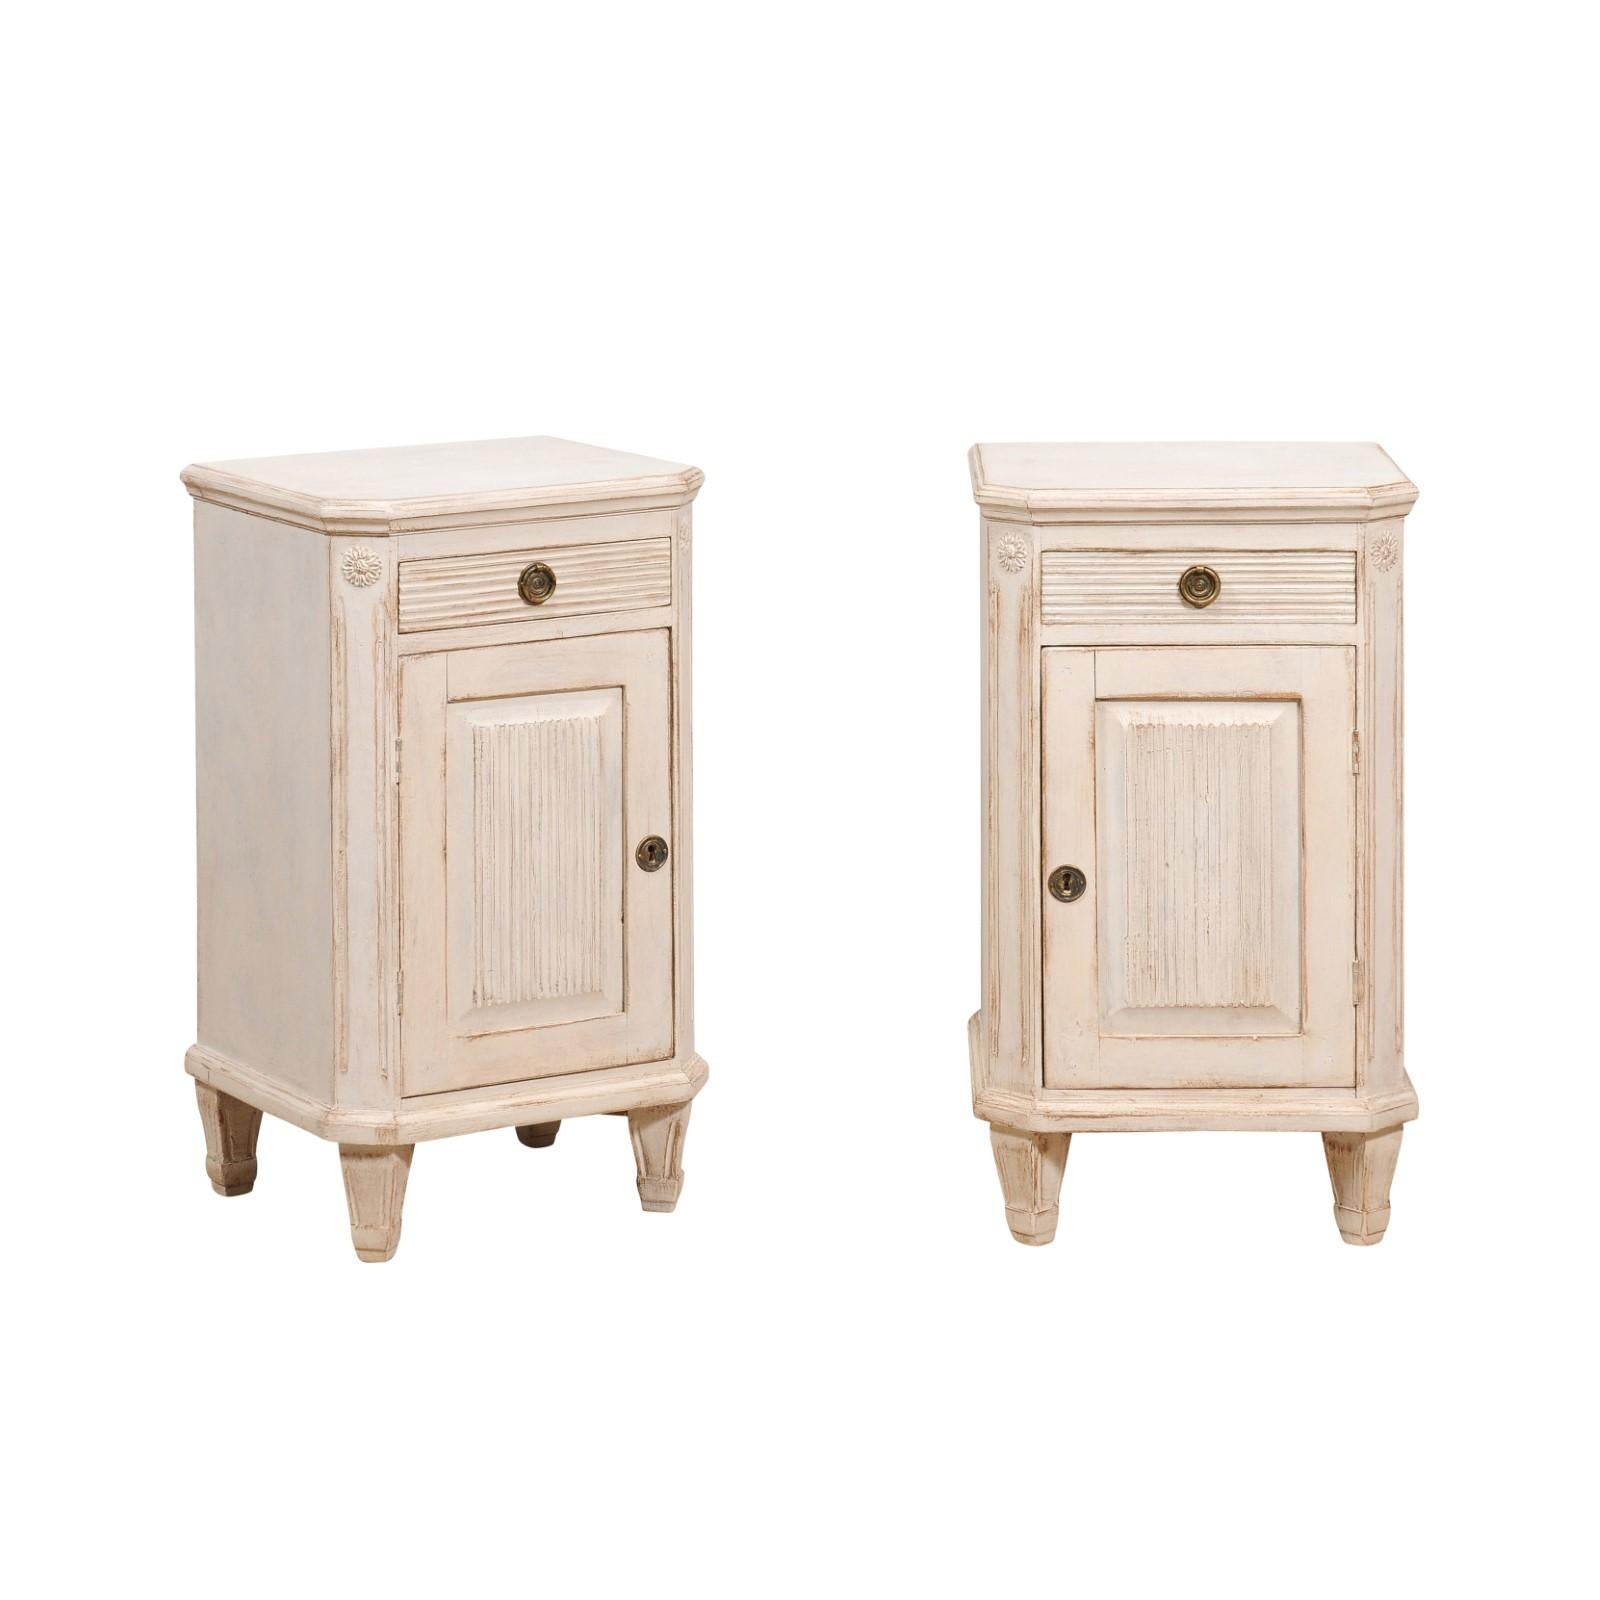 A pair of Swedish Gustavian style bedside tables from the 19th century with off white / light gray painted finish, single drawer and single door. This pair of Swedish Gustavian style bedside tables from the 19th century exudes timeless elegance and